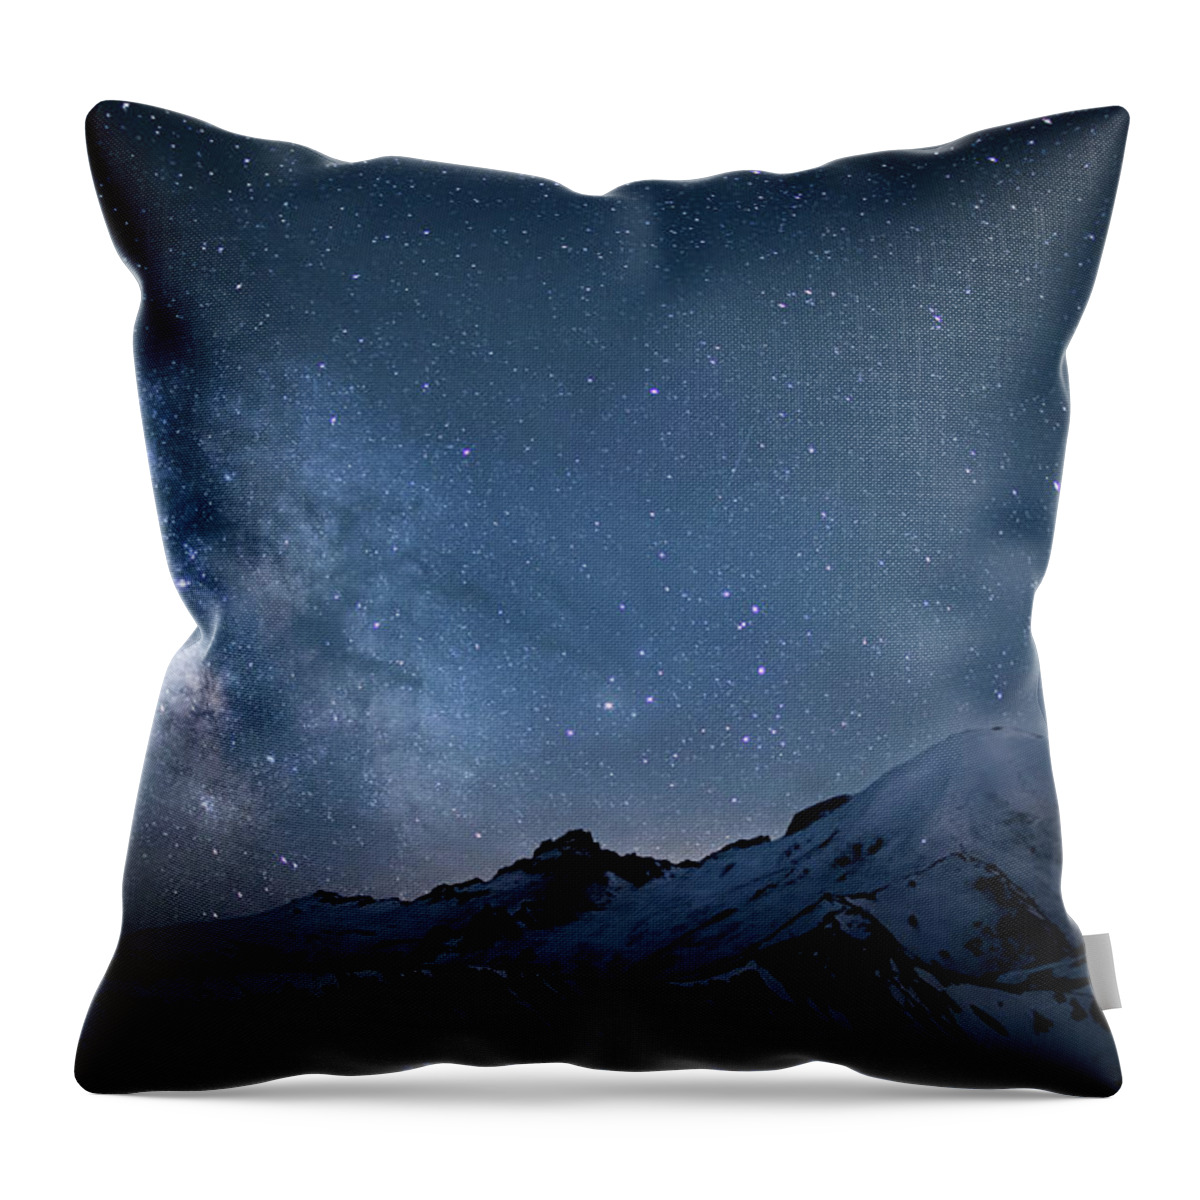 Scenics Throw Pillow featuring the photograph Milky Way Over Mount Rainier by Ed Leckert